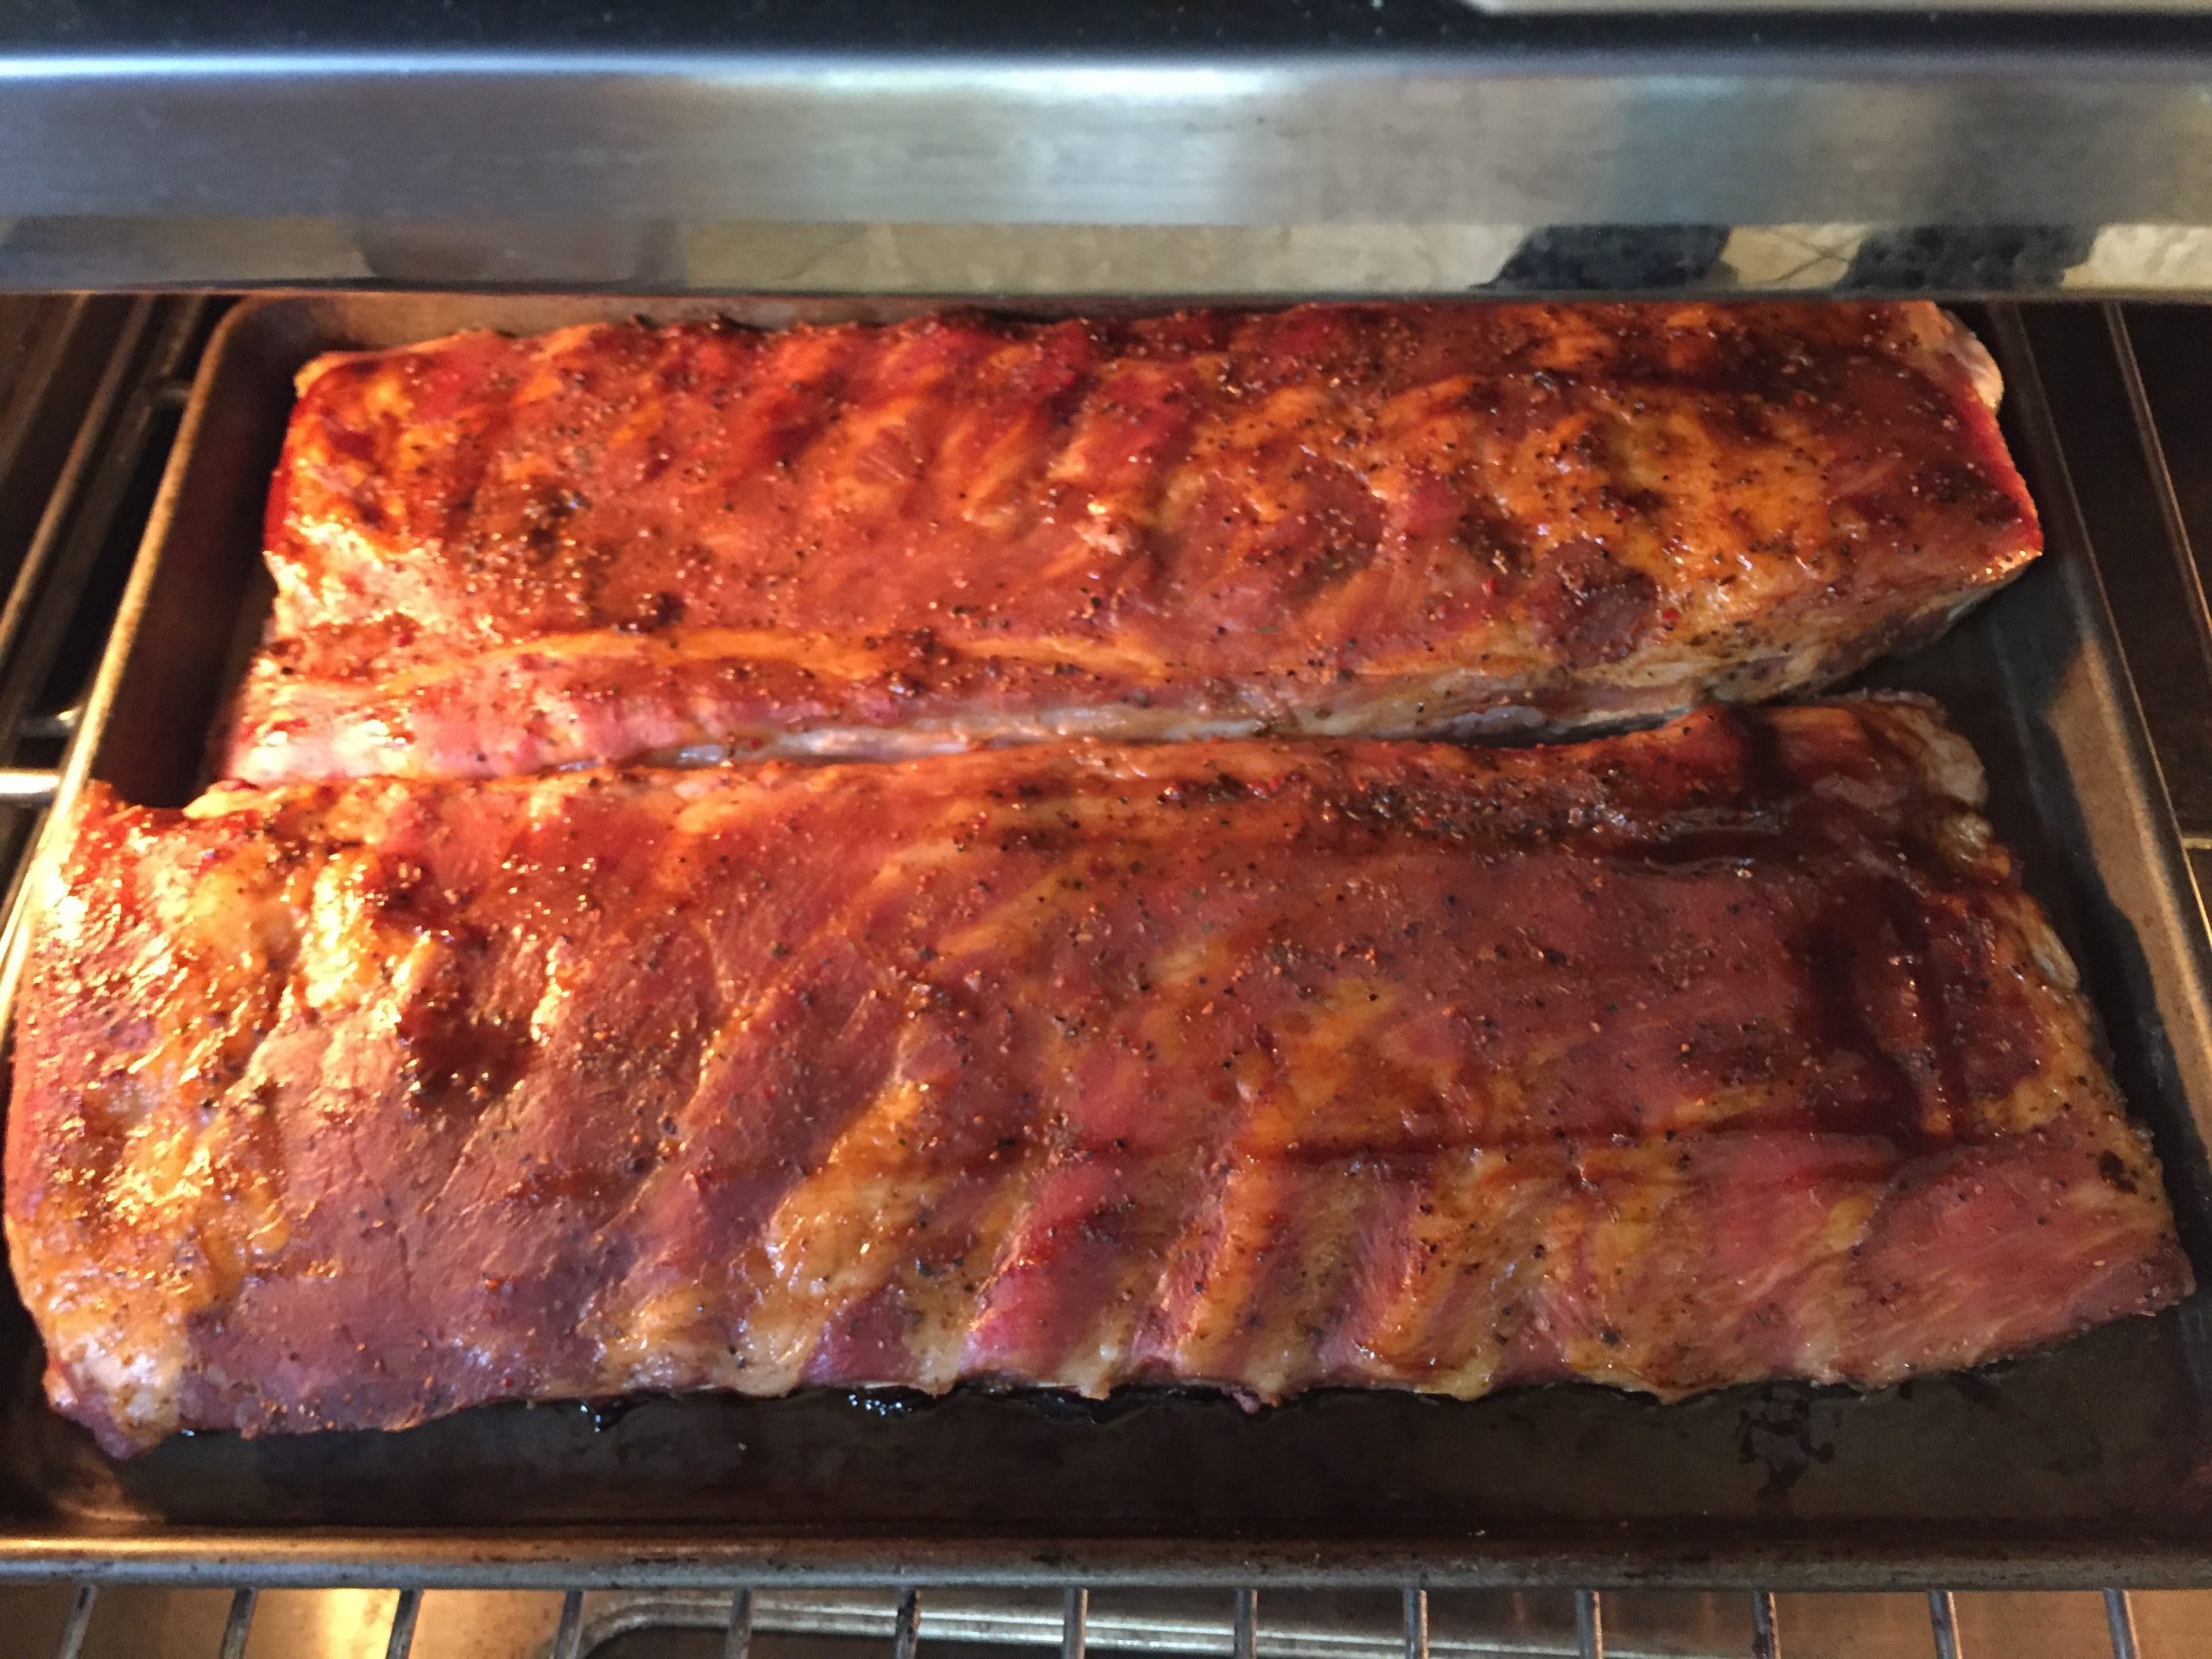 SLow cooking ribs in low temperature oven